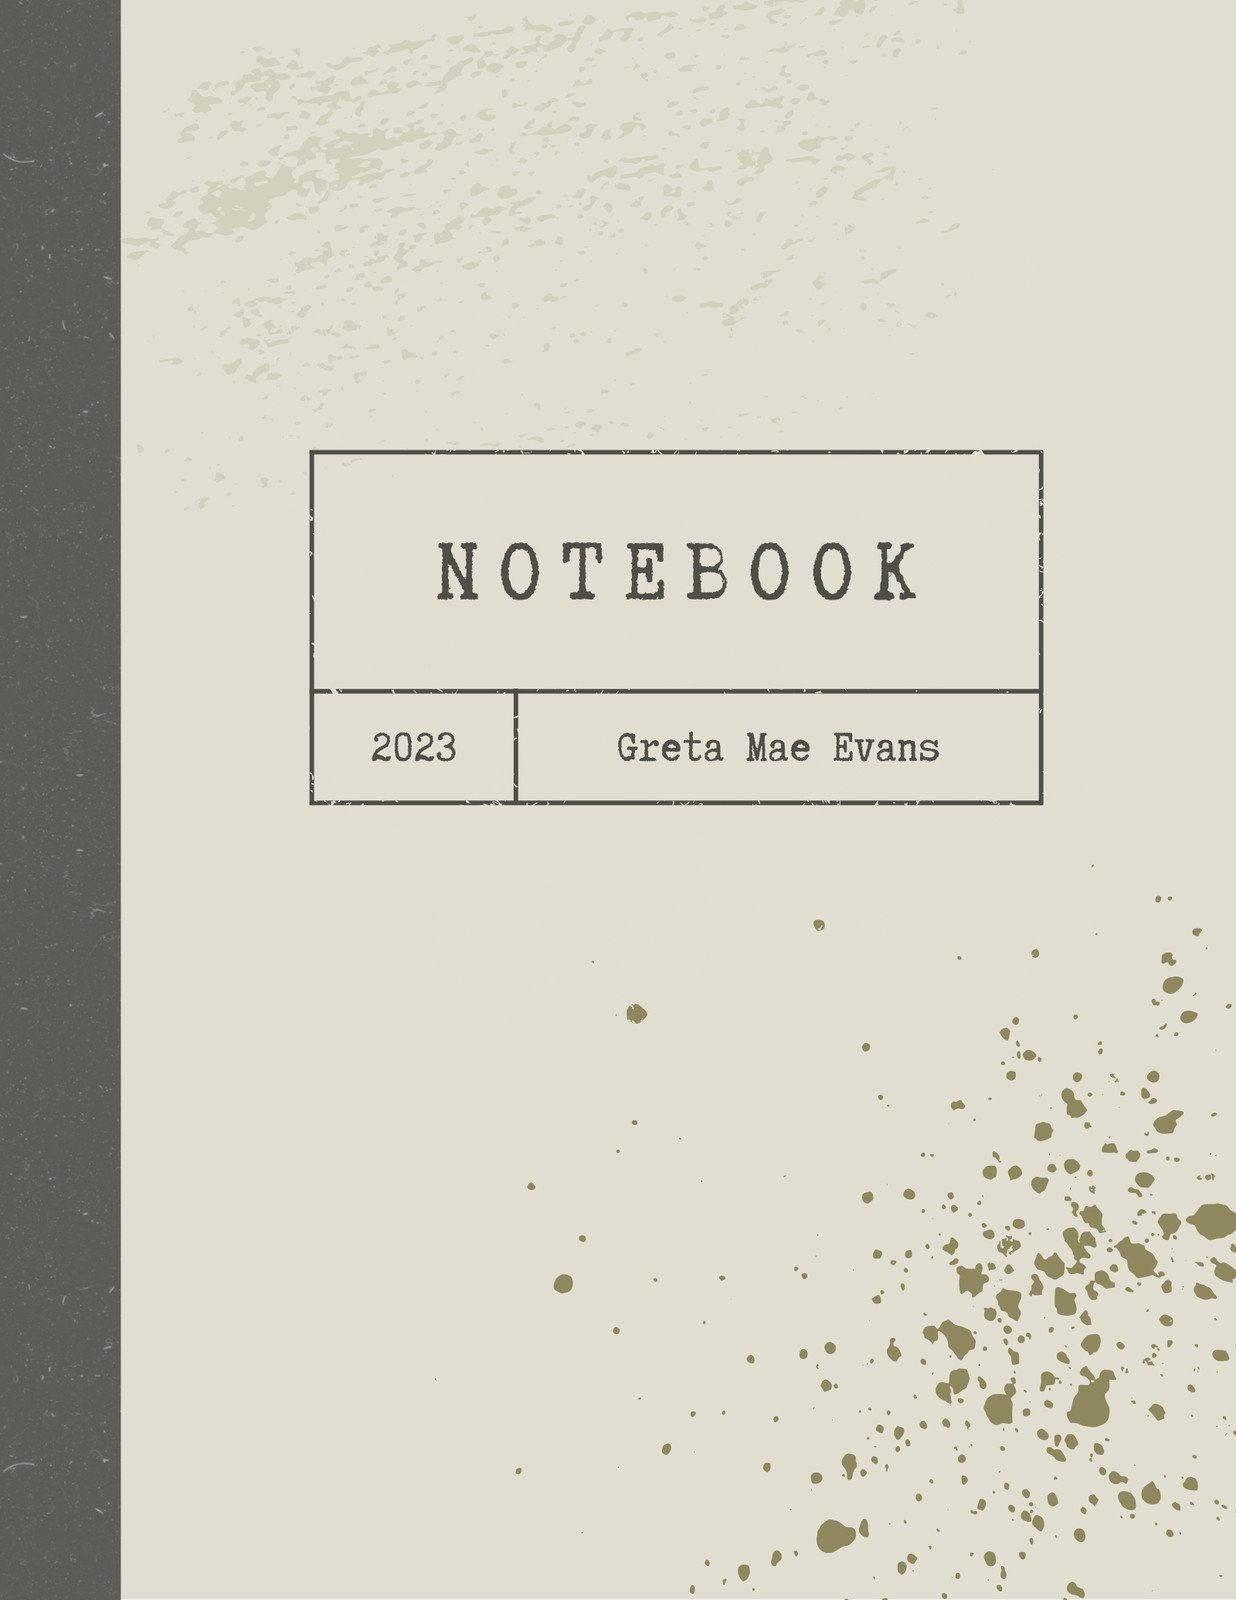 Grey Vintage Aesthetic Texture Notebook Cover